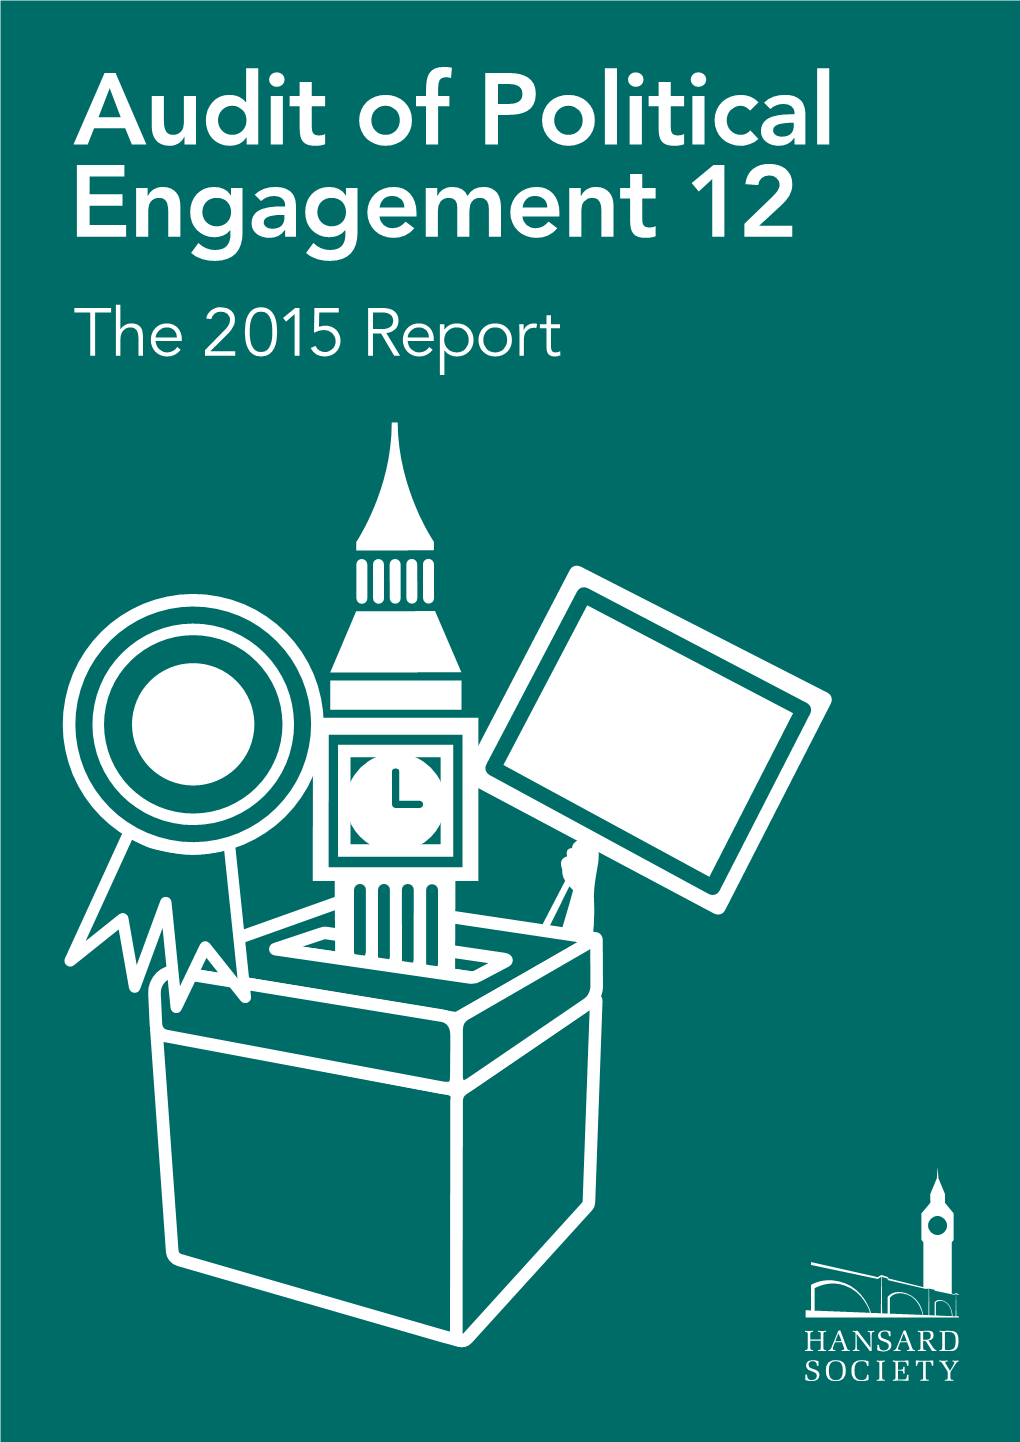 Audit of Political Engagement 12 the 2015 Re Po Rt Text and Graphics © Hansard Society 20 15